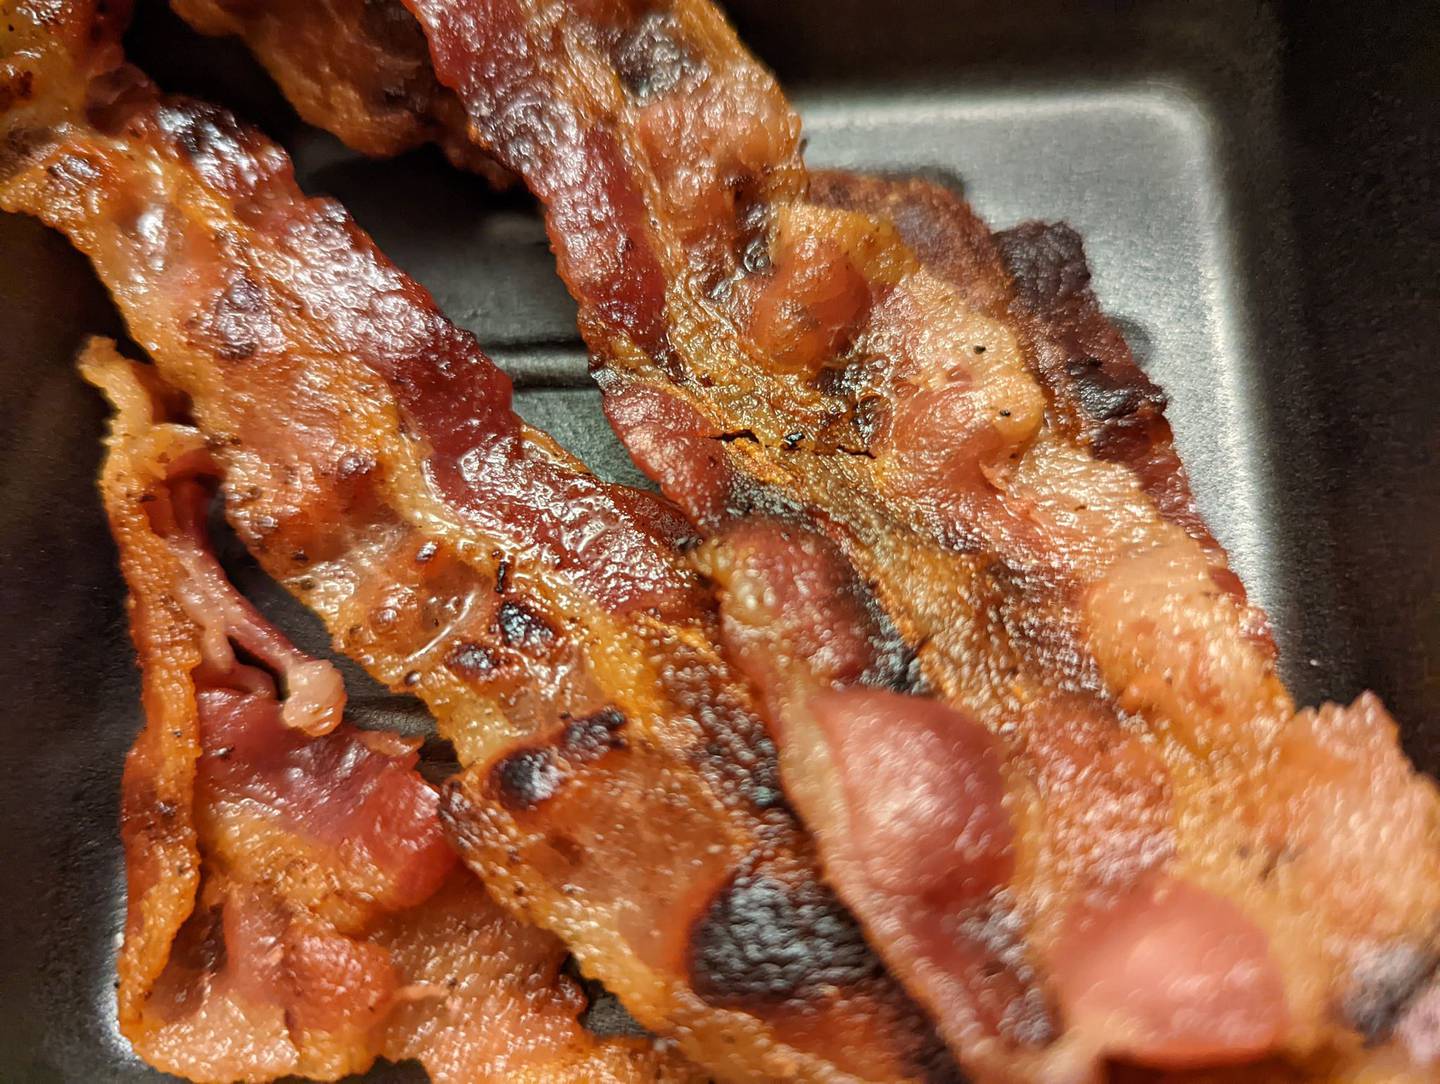 Pictured is a side of four strips of bacon for $4.24 from Happy Place Cafe in Shorewood.